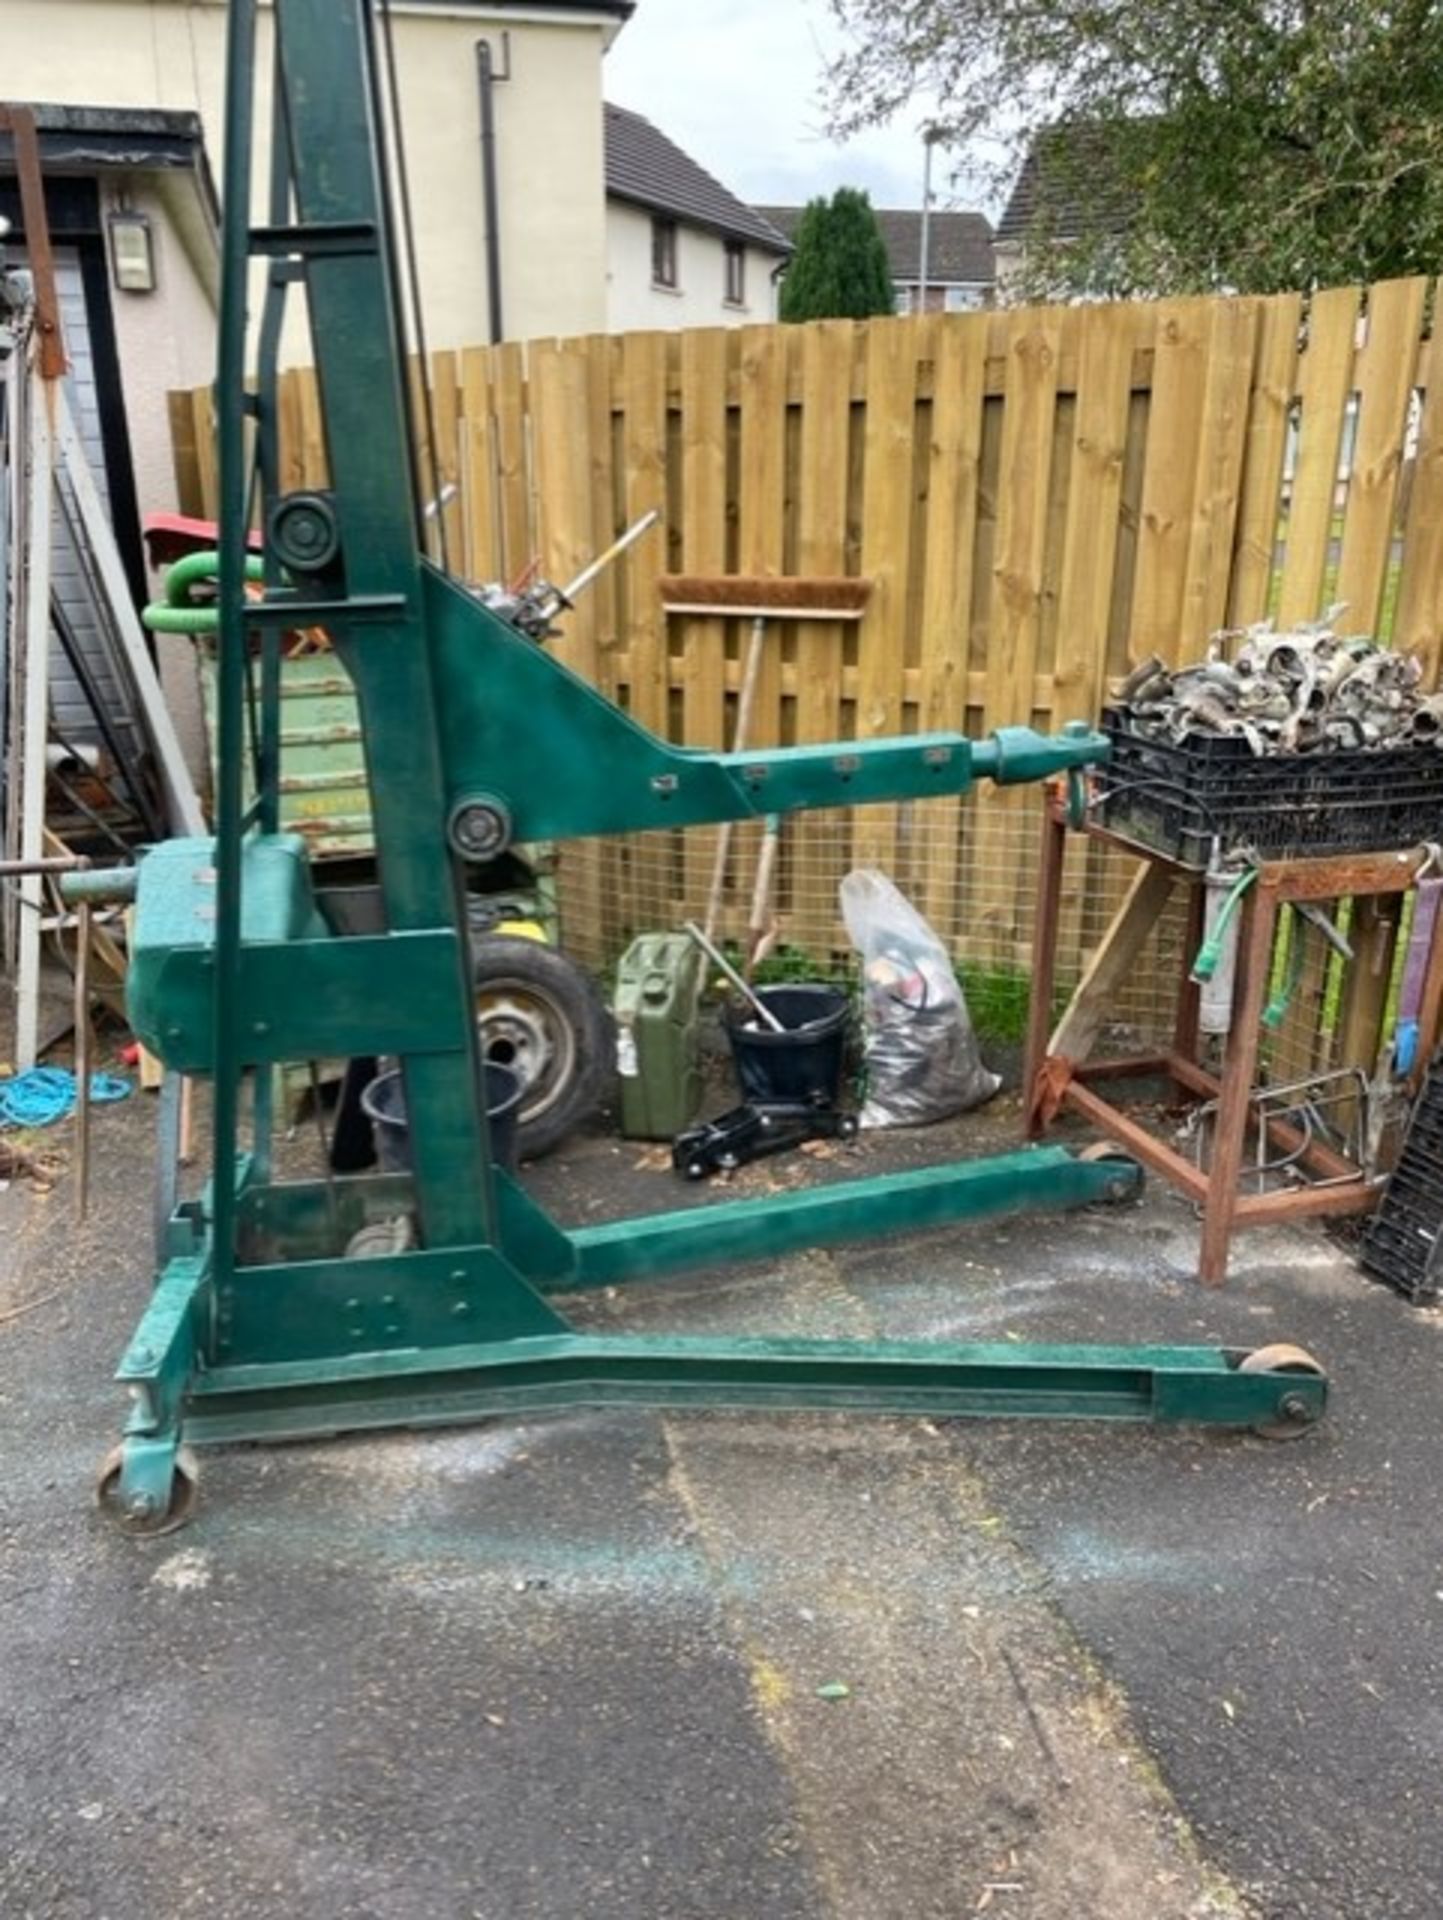 Old old manual crane for lifting all in working order heavy heavy very handy for certain things